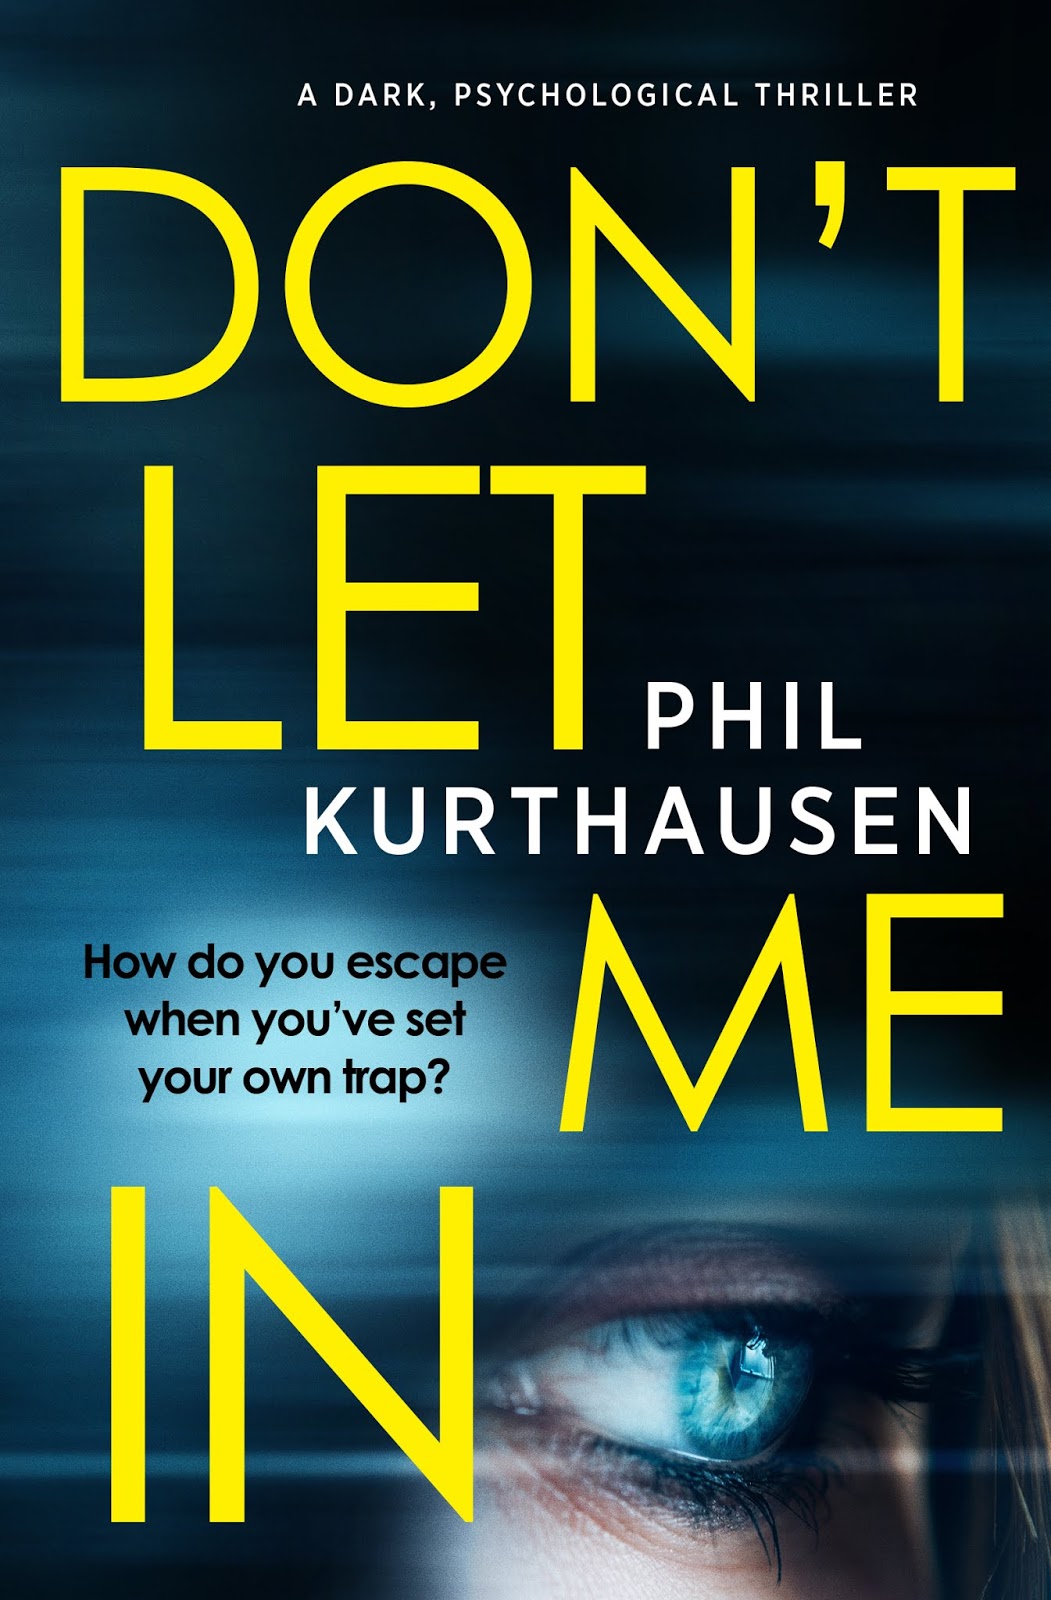 Download e-book You let me in book review For Free